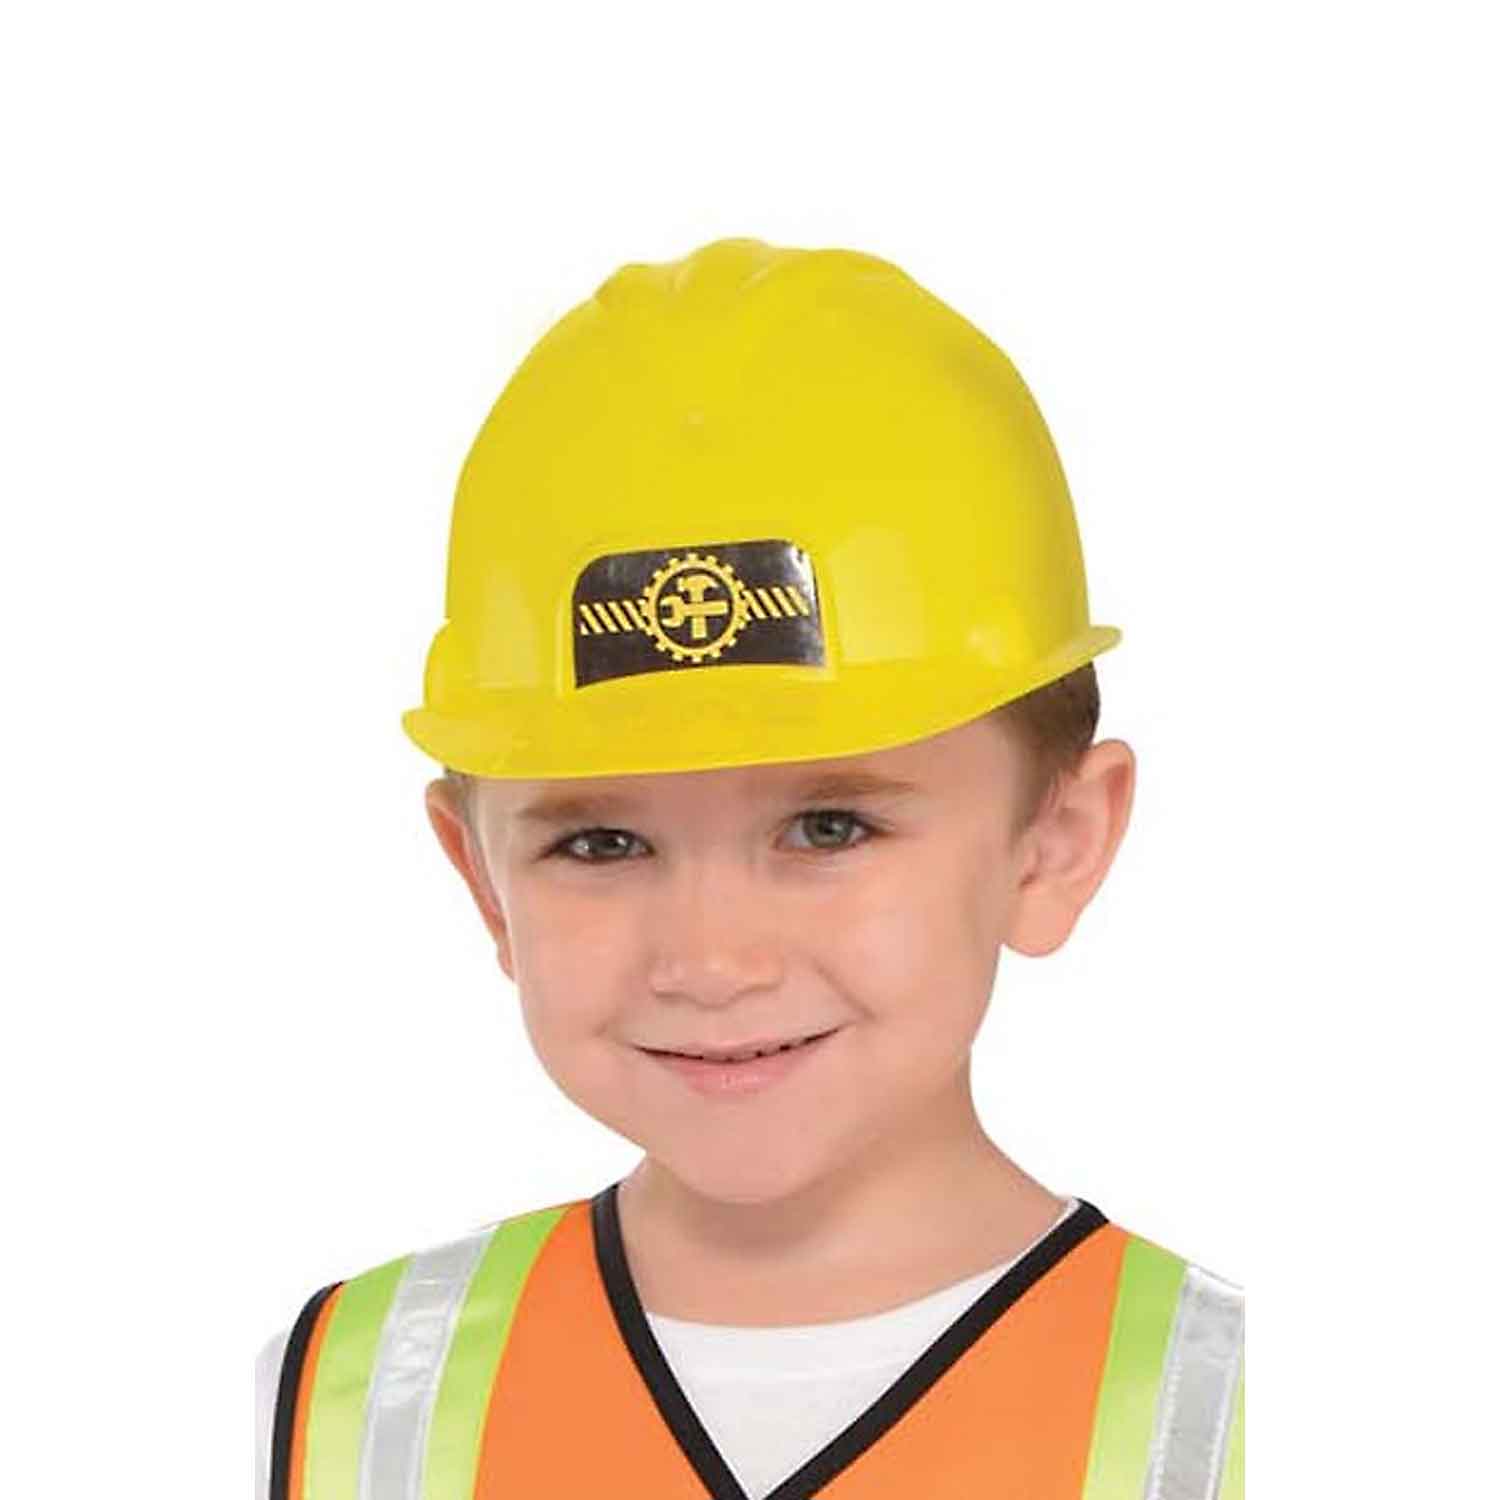 Construction Worker's Hat Costumes & Apparel - Party Centre - Party Centre